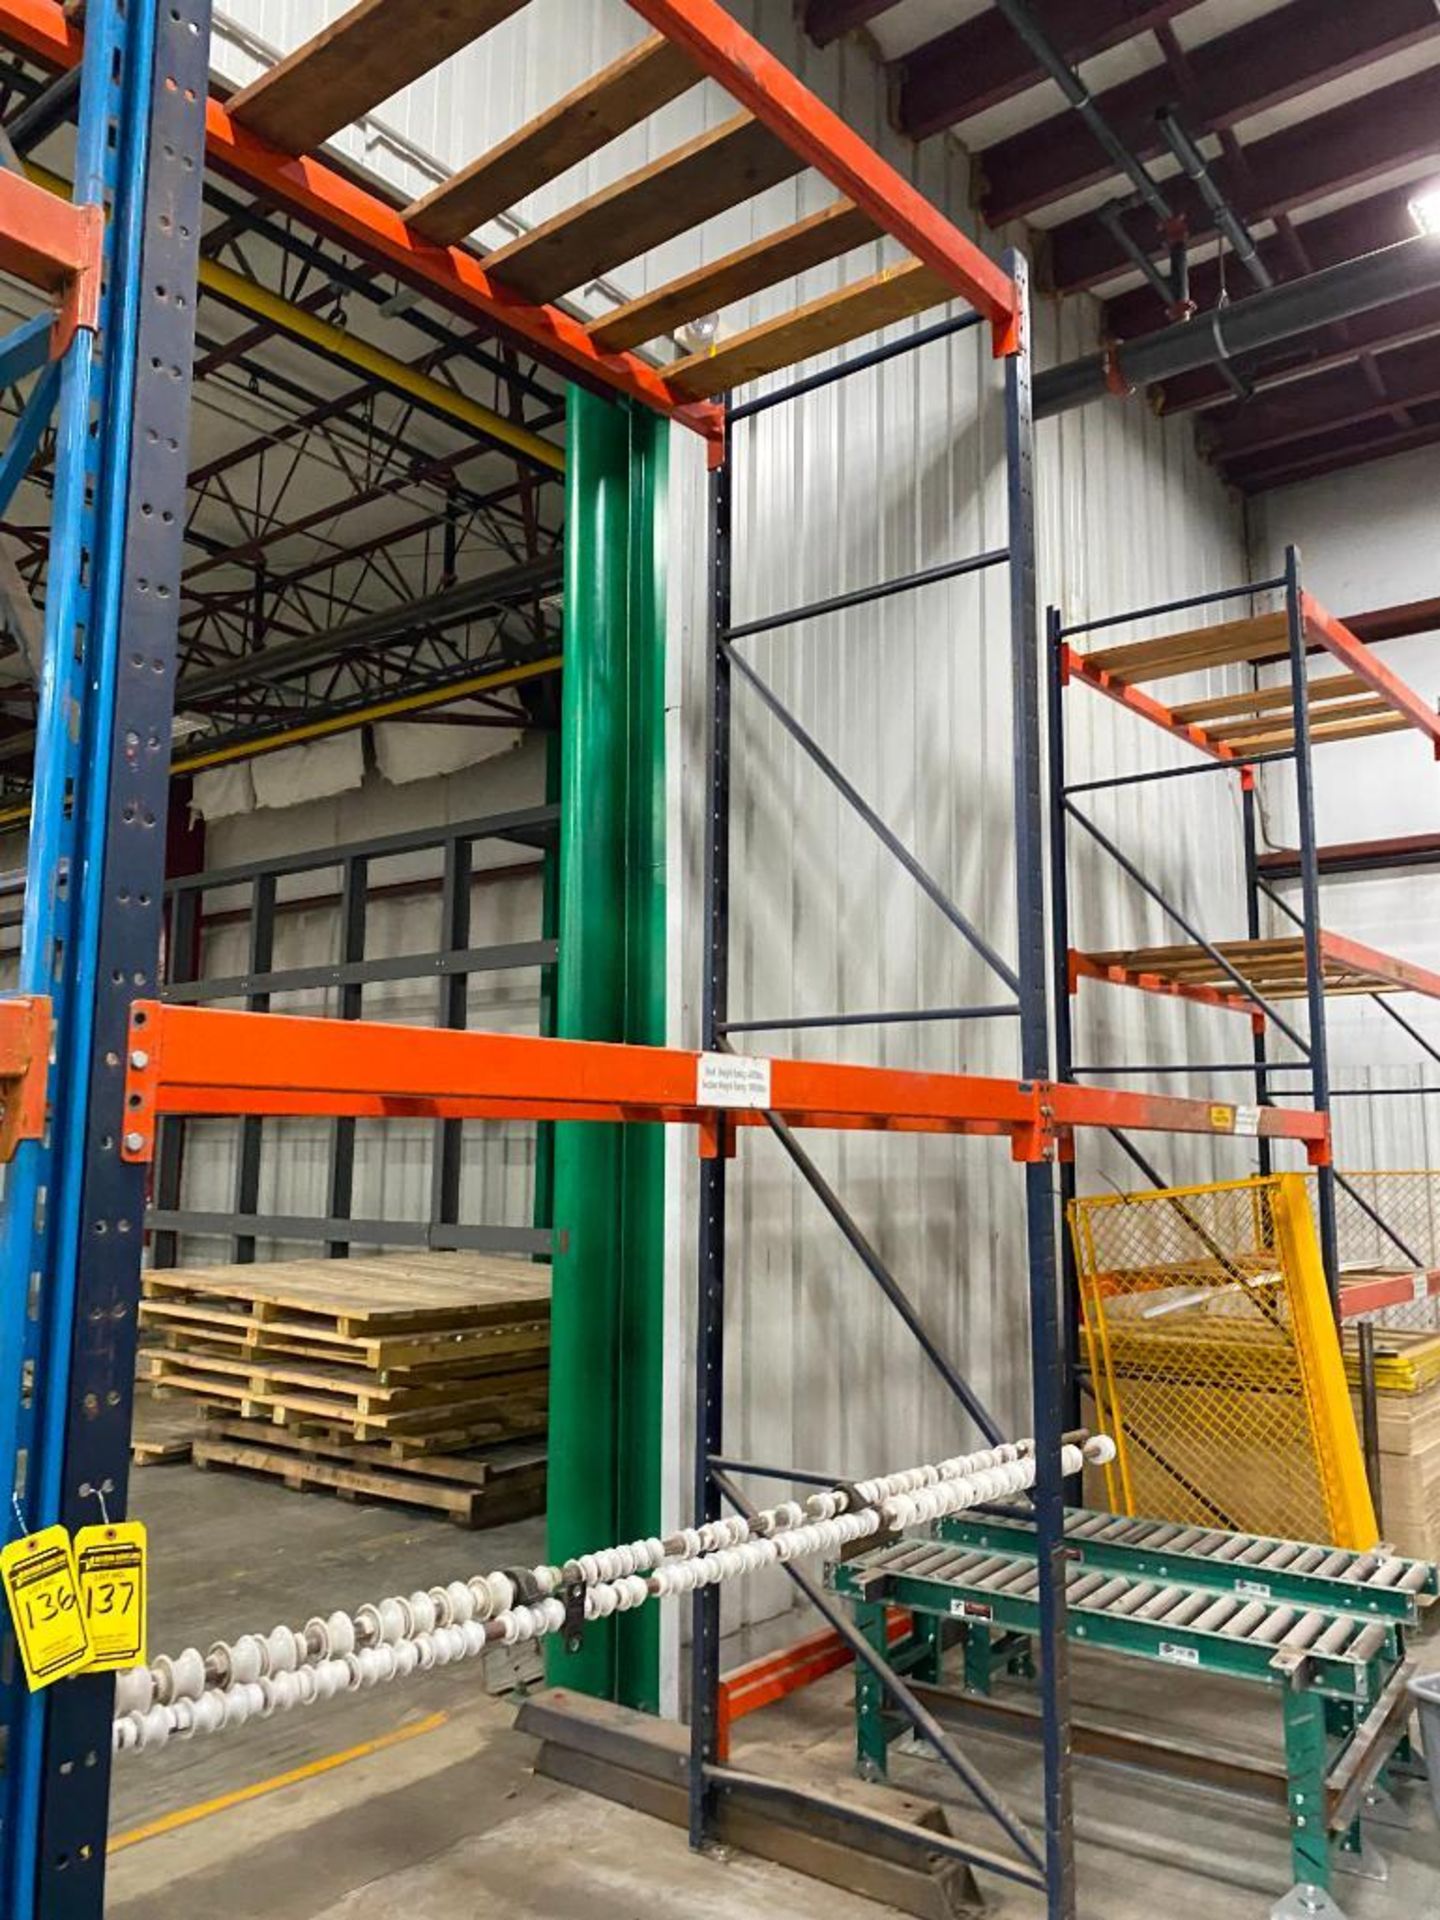 (3) Sections of Pallet Racking: (4) 14' x 42" D Uprights, (12) 4" x 92" Horizontal Beams, w/ 2" x 6"